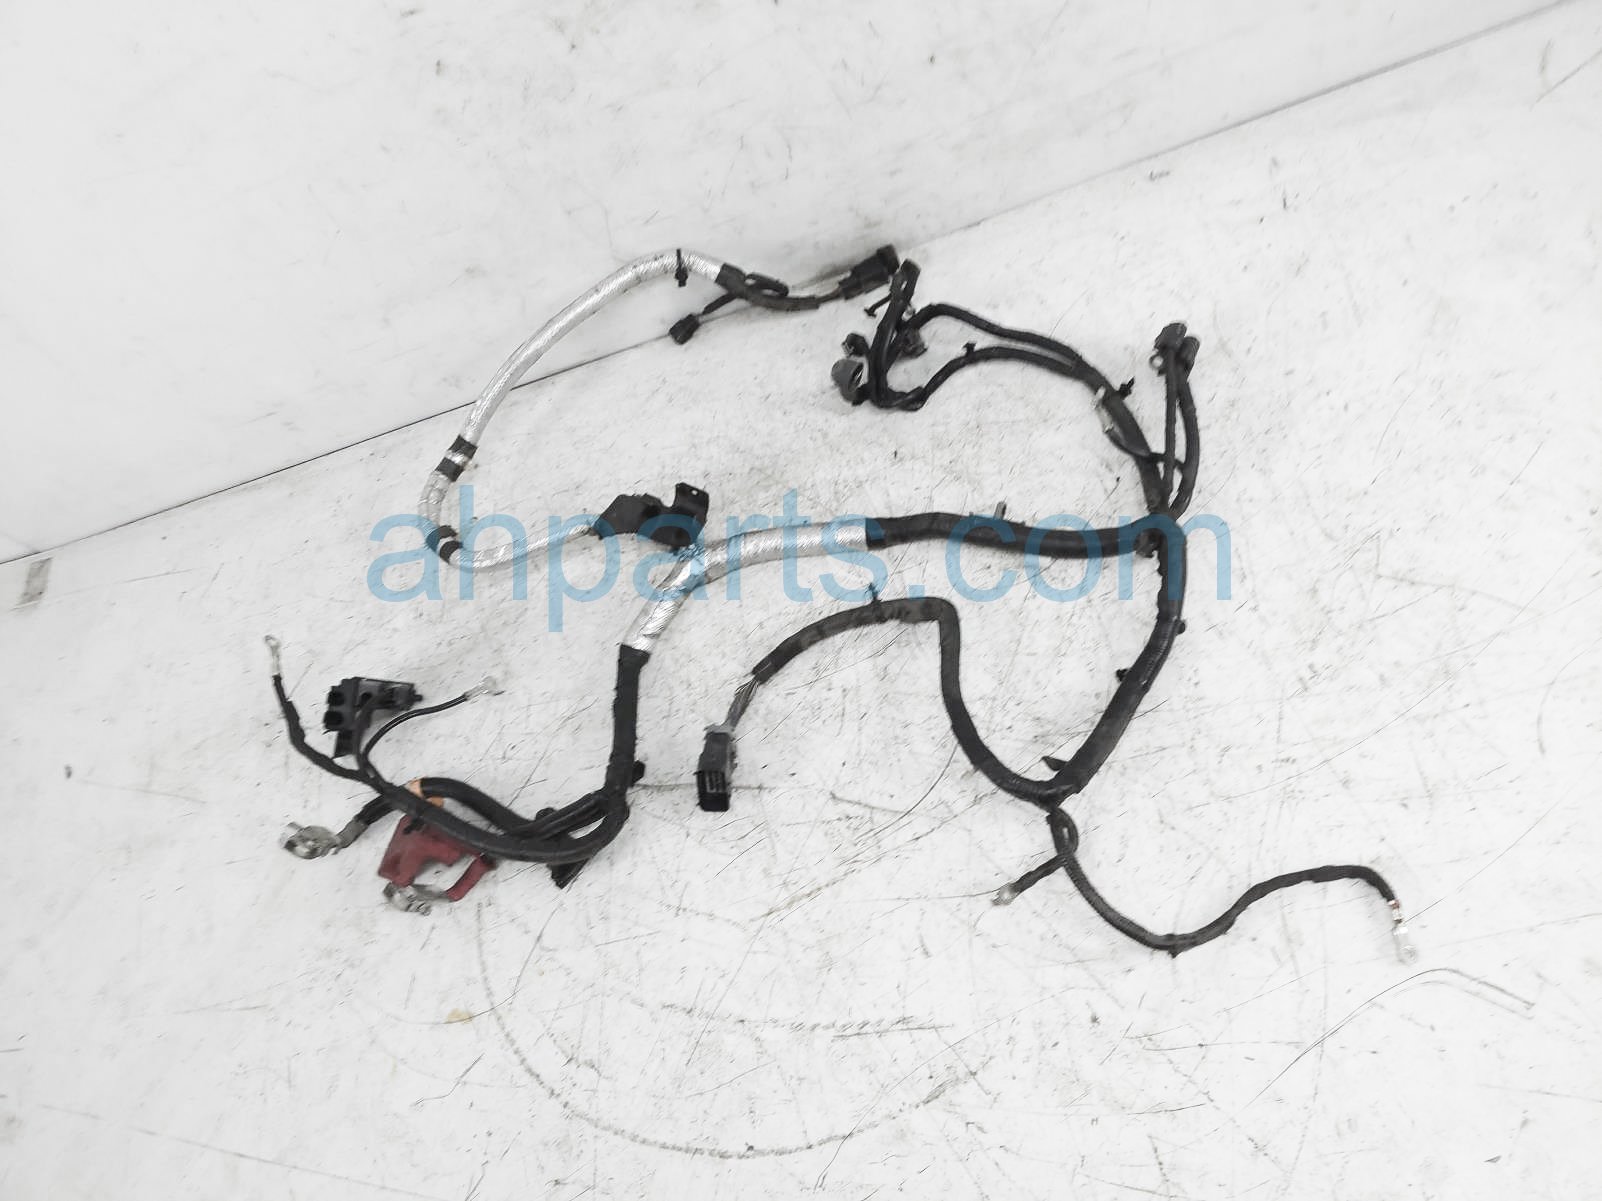 $115 Ford POSITIVE BATTERY CABLE HARNESS